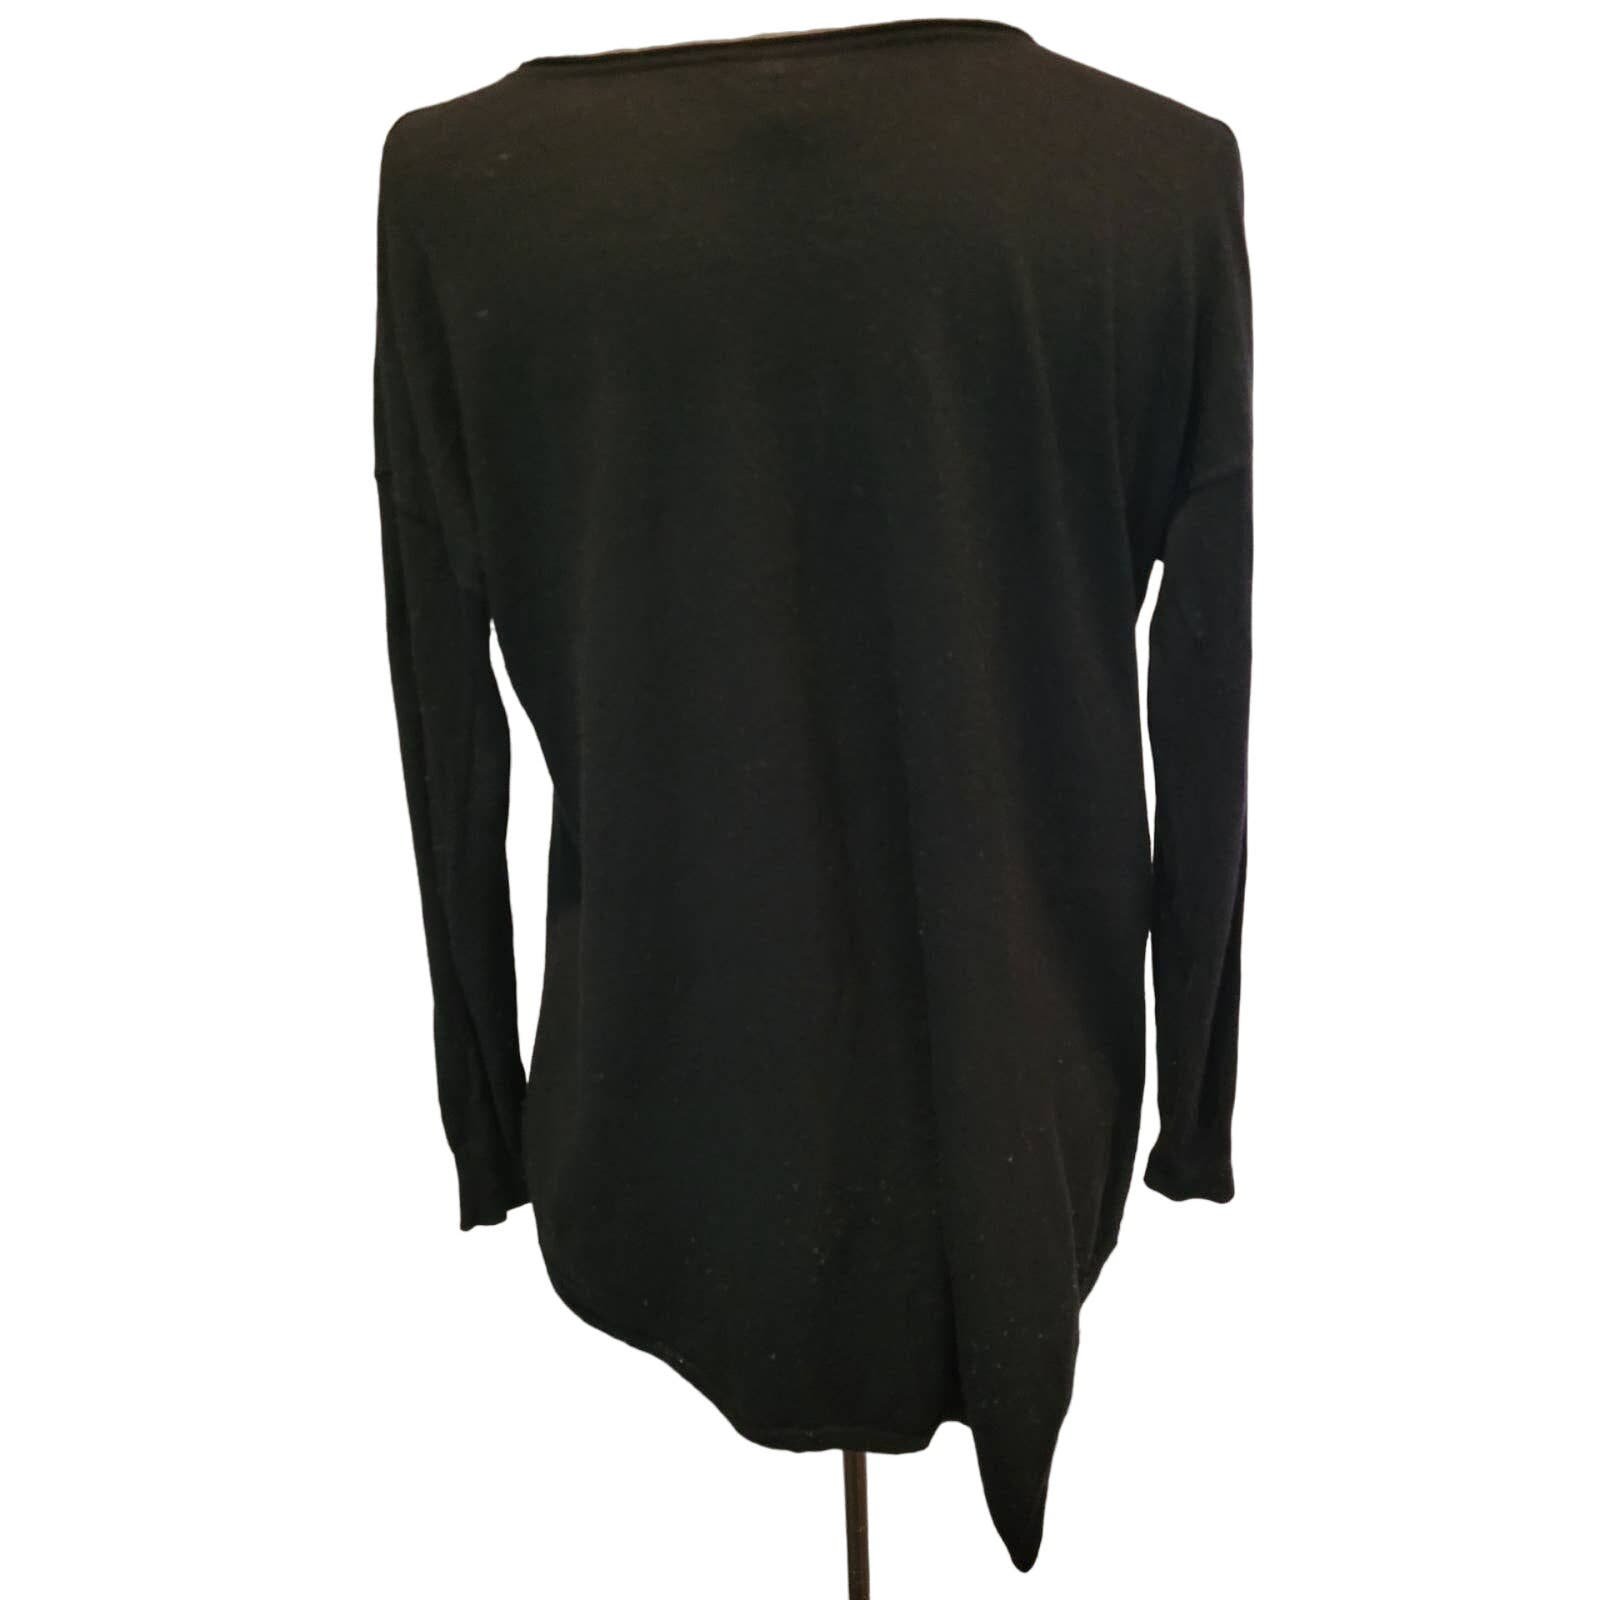 Gorgeous Joie Cashmere Wool Blend Soft Oversized Asymetrical Sweater Size XS pkAvvmscS Everyday Low Prices